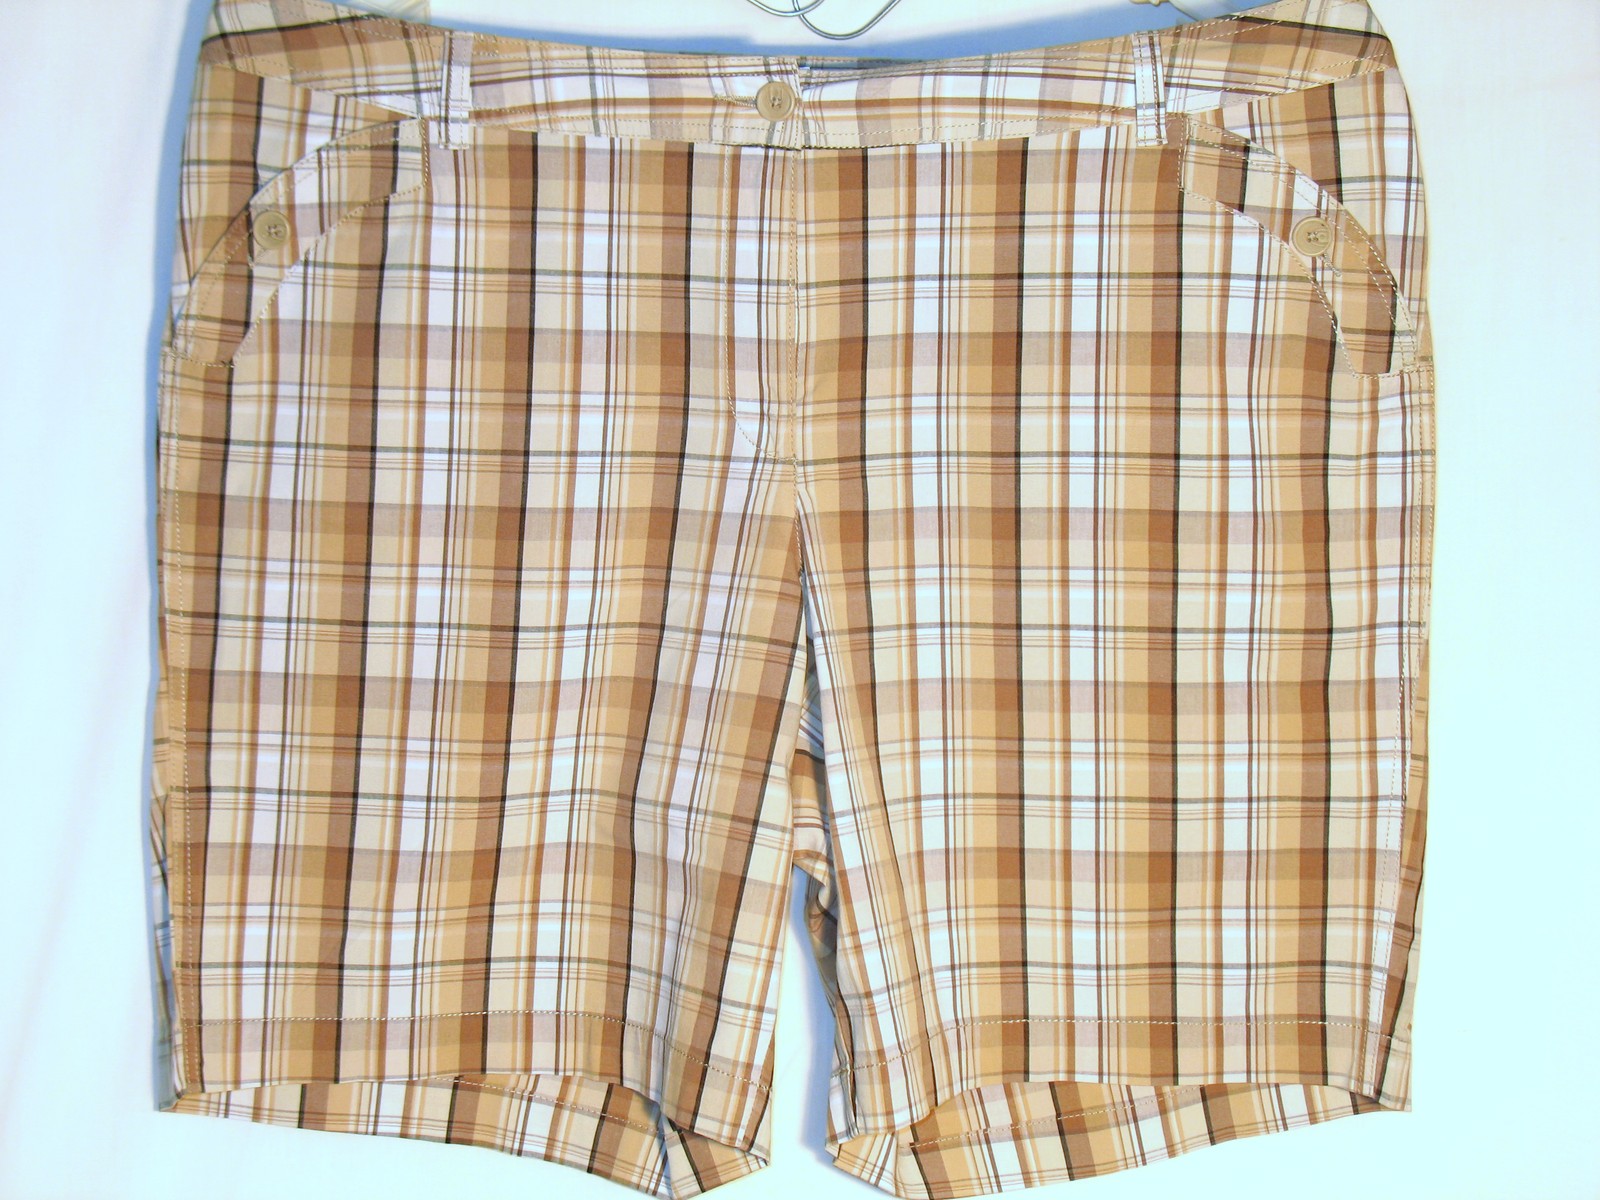 1-just my size brown plaid.jpg  by BudgetGeneral